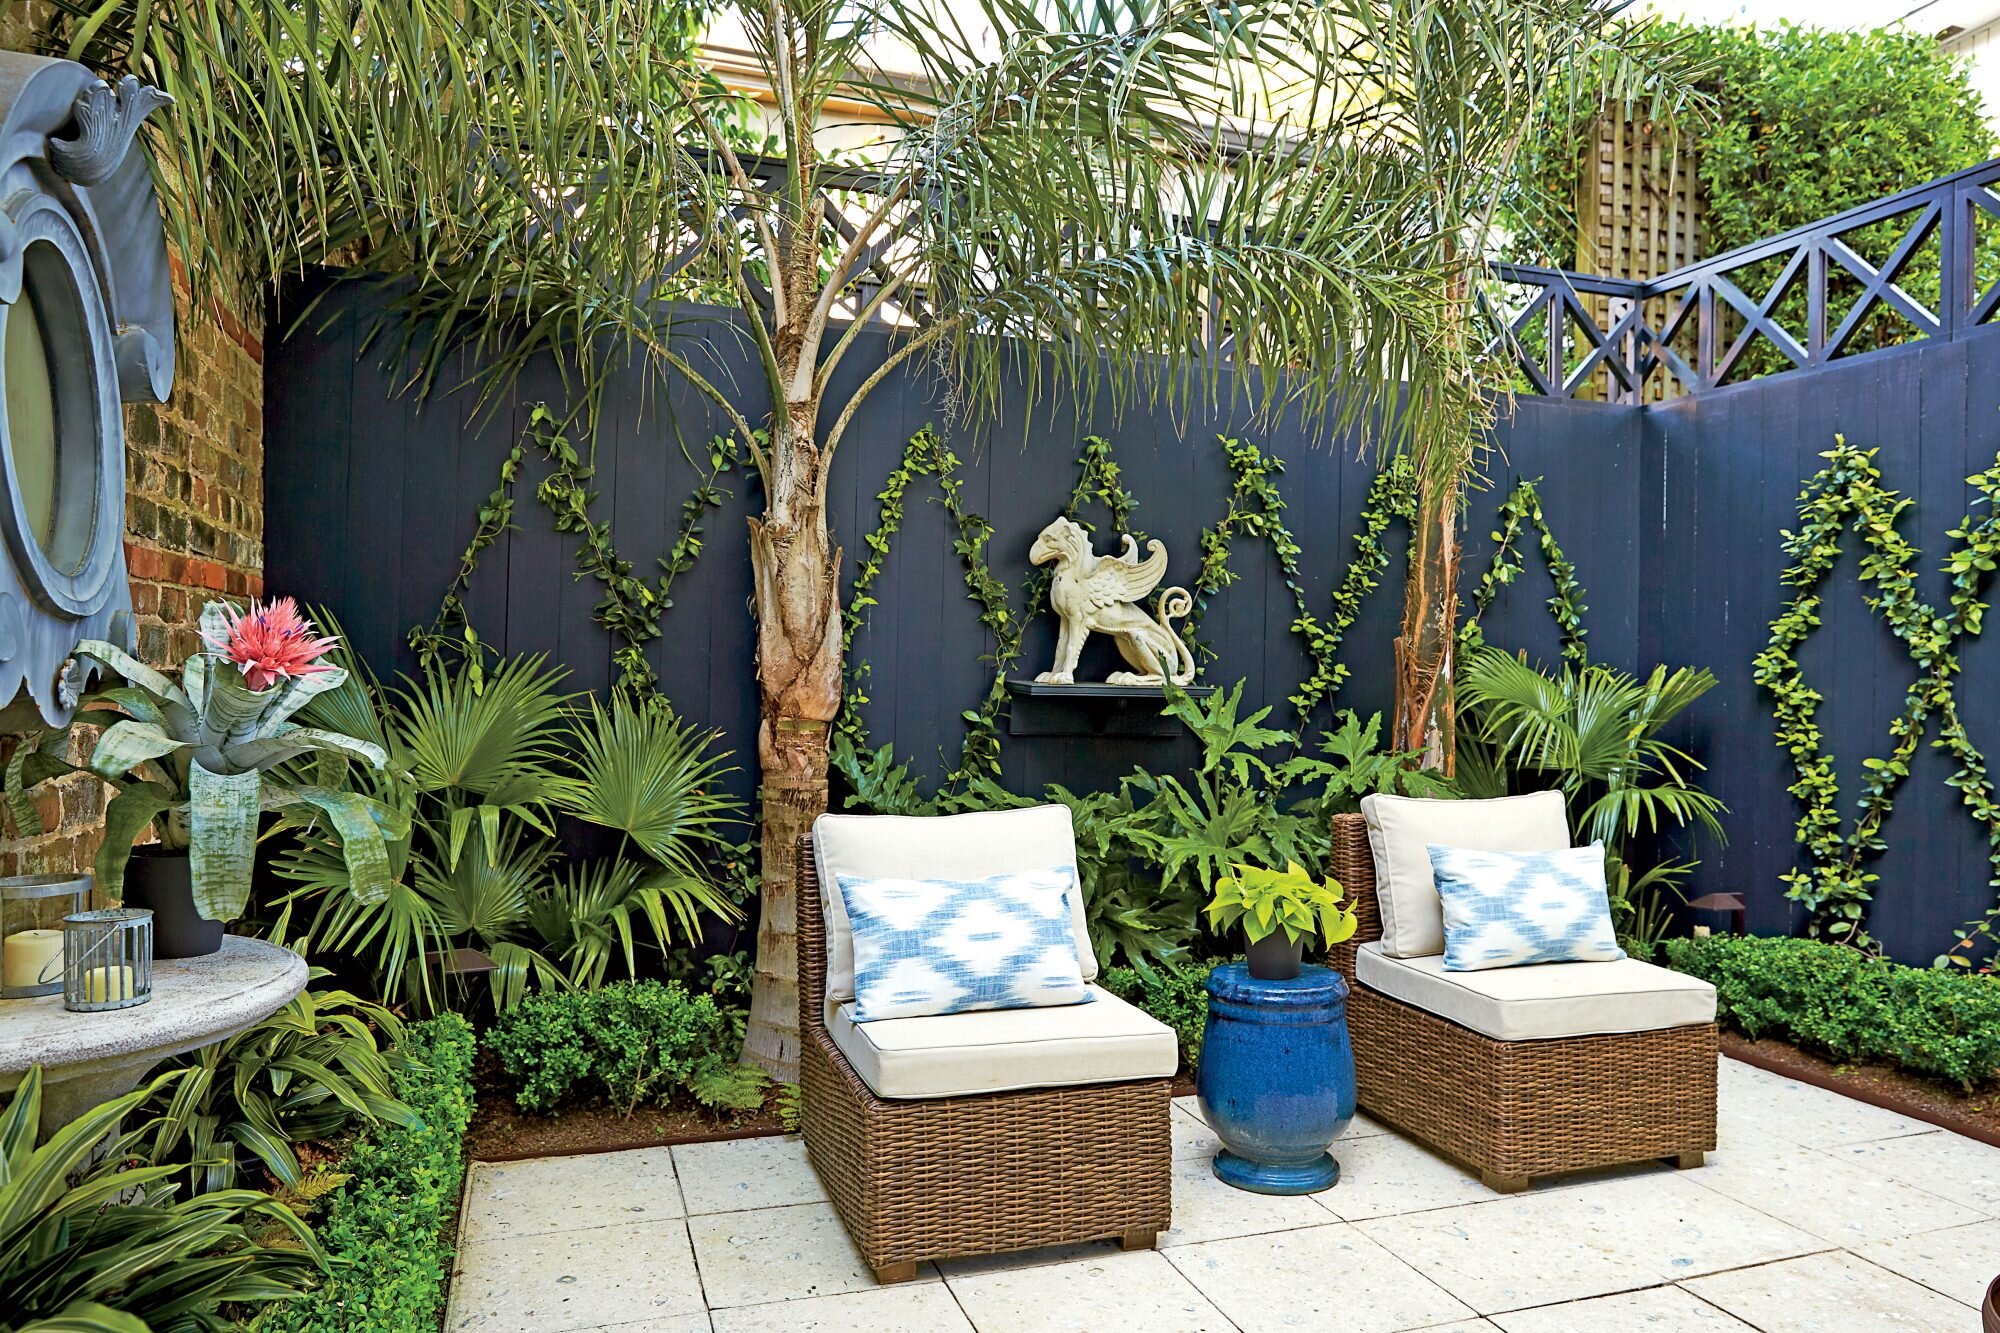 5 Easy and Affordable Updates You Can Make to Your Outdoor Space This Summer